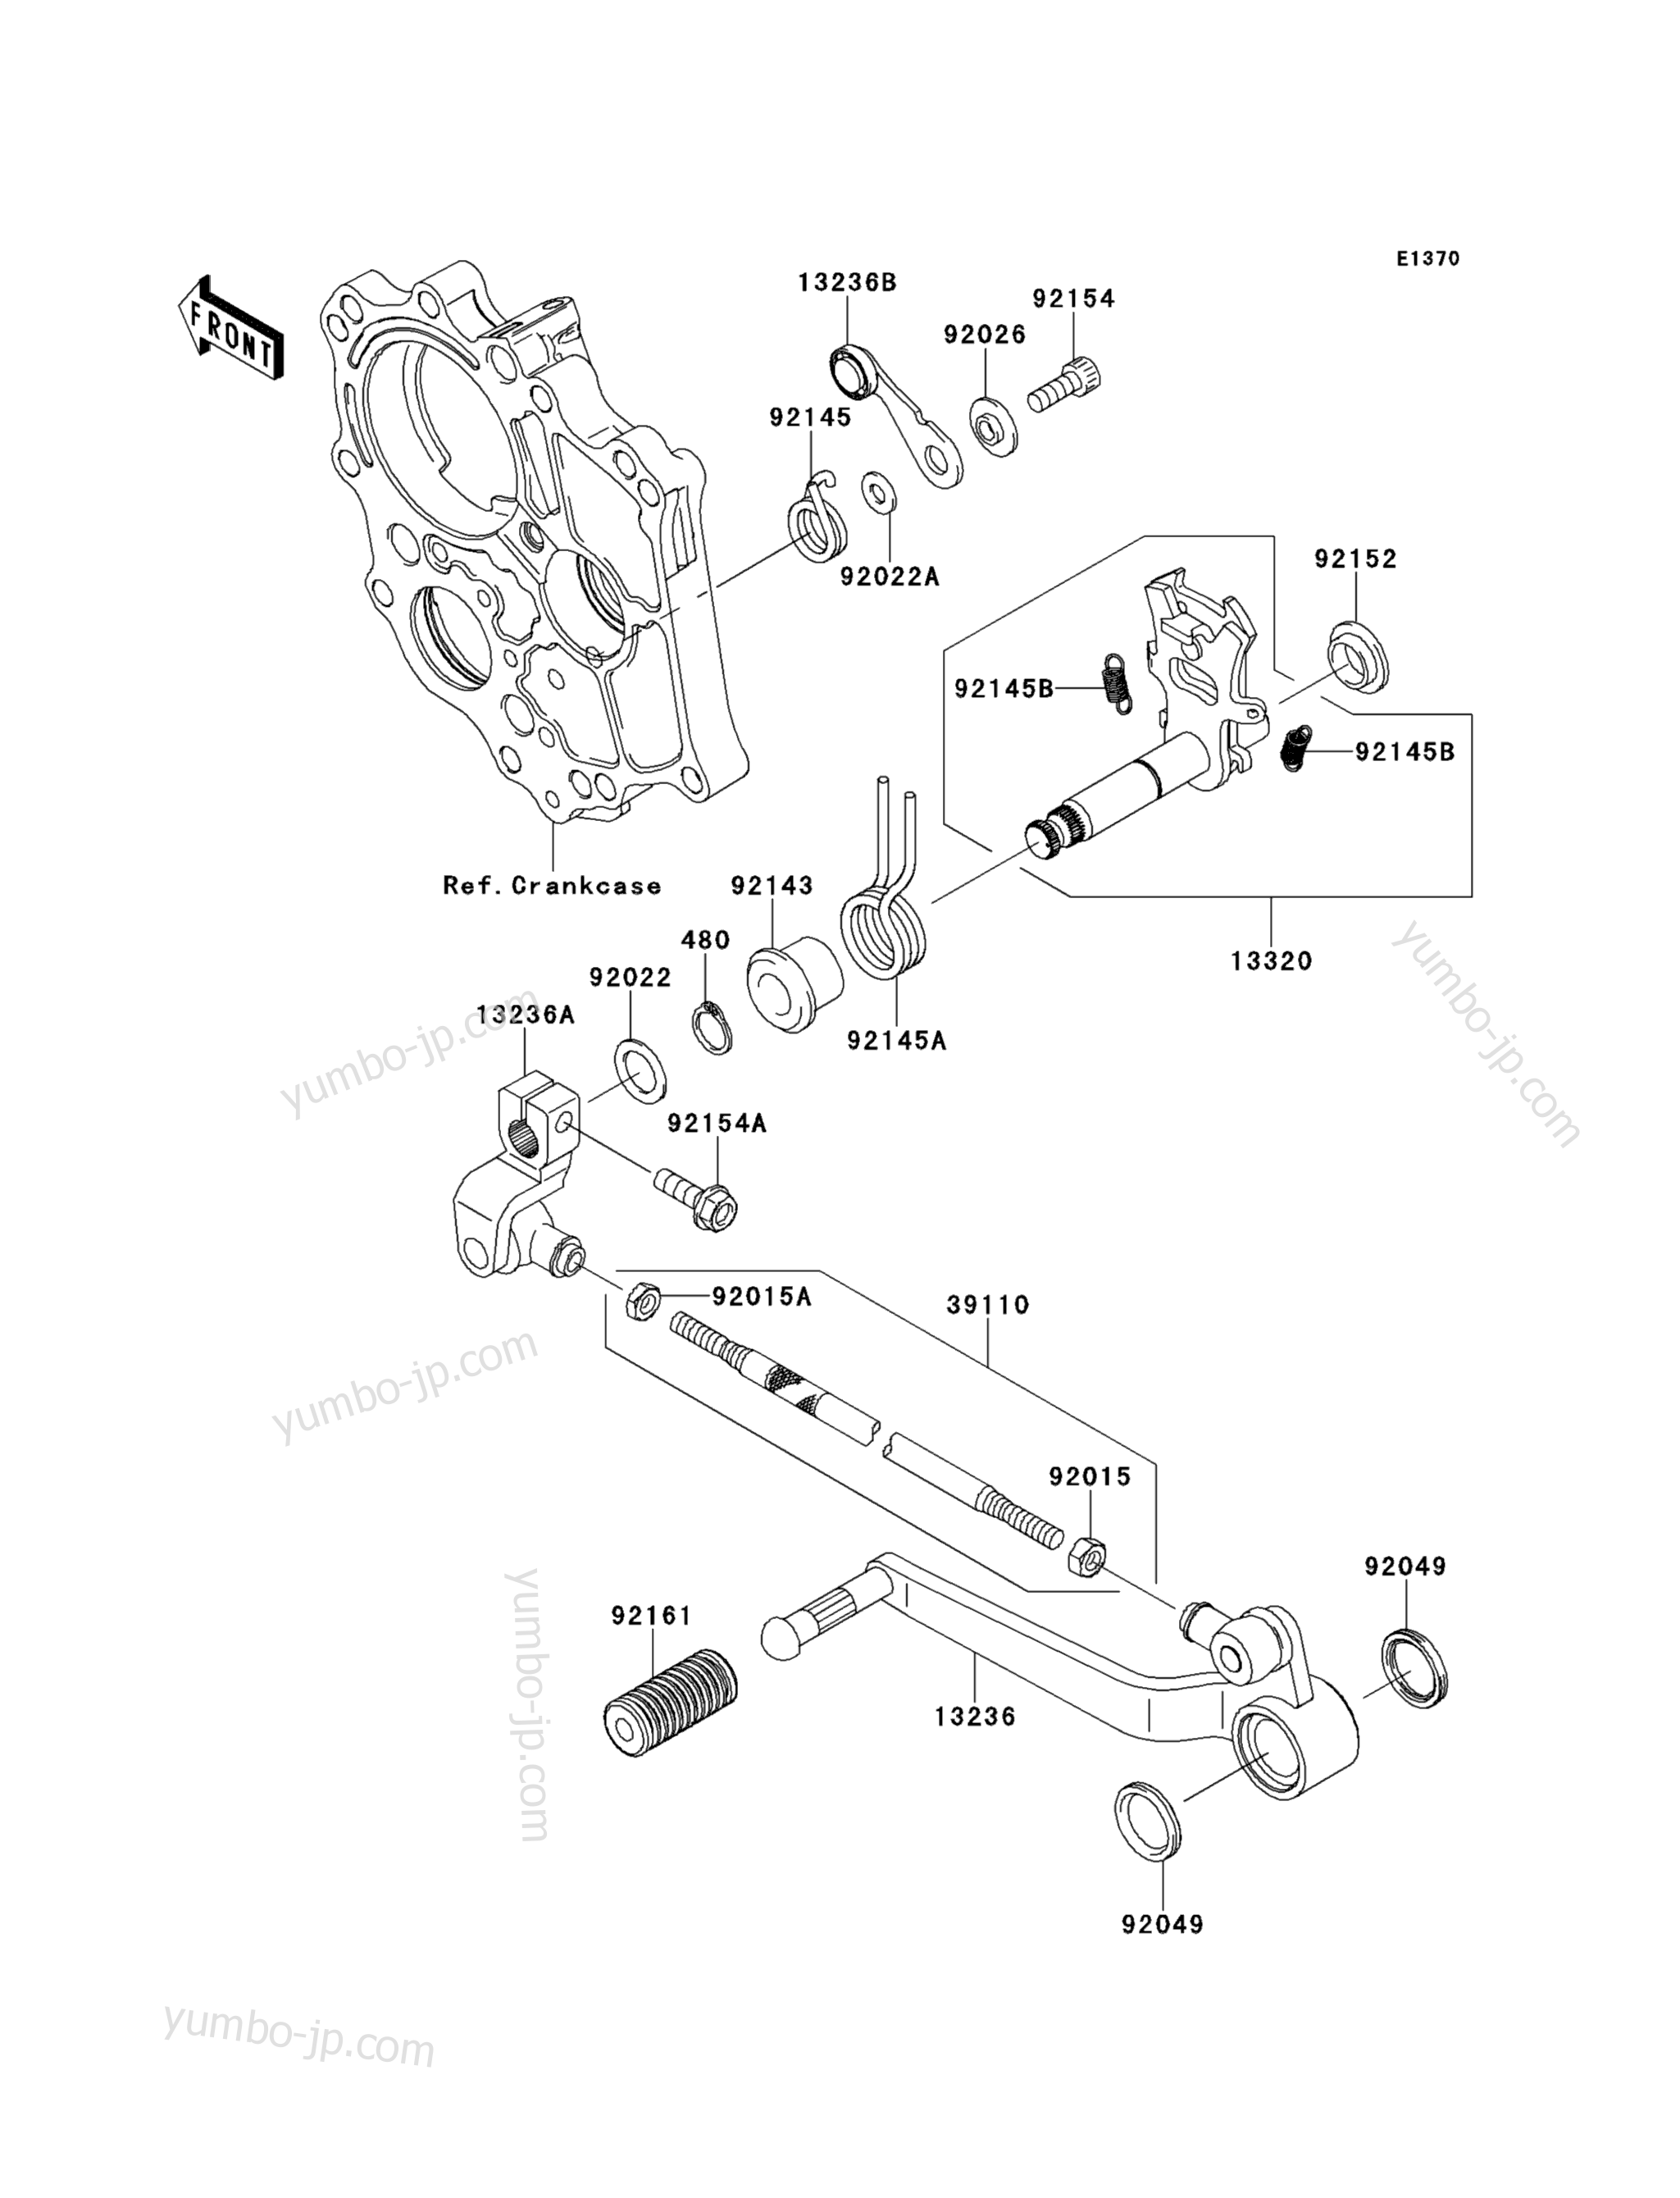 GEAR CHANGE MECHANISM for motorcycles KAWASAKI VERSYS (KLE650CCF) 2012 year